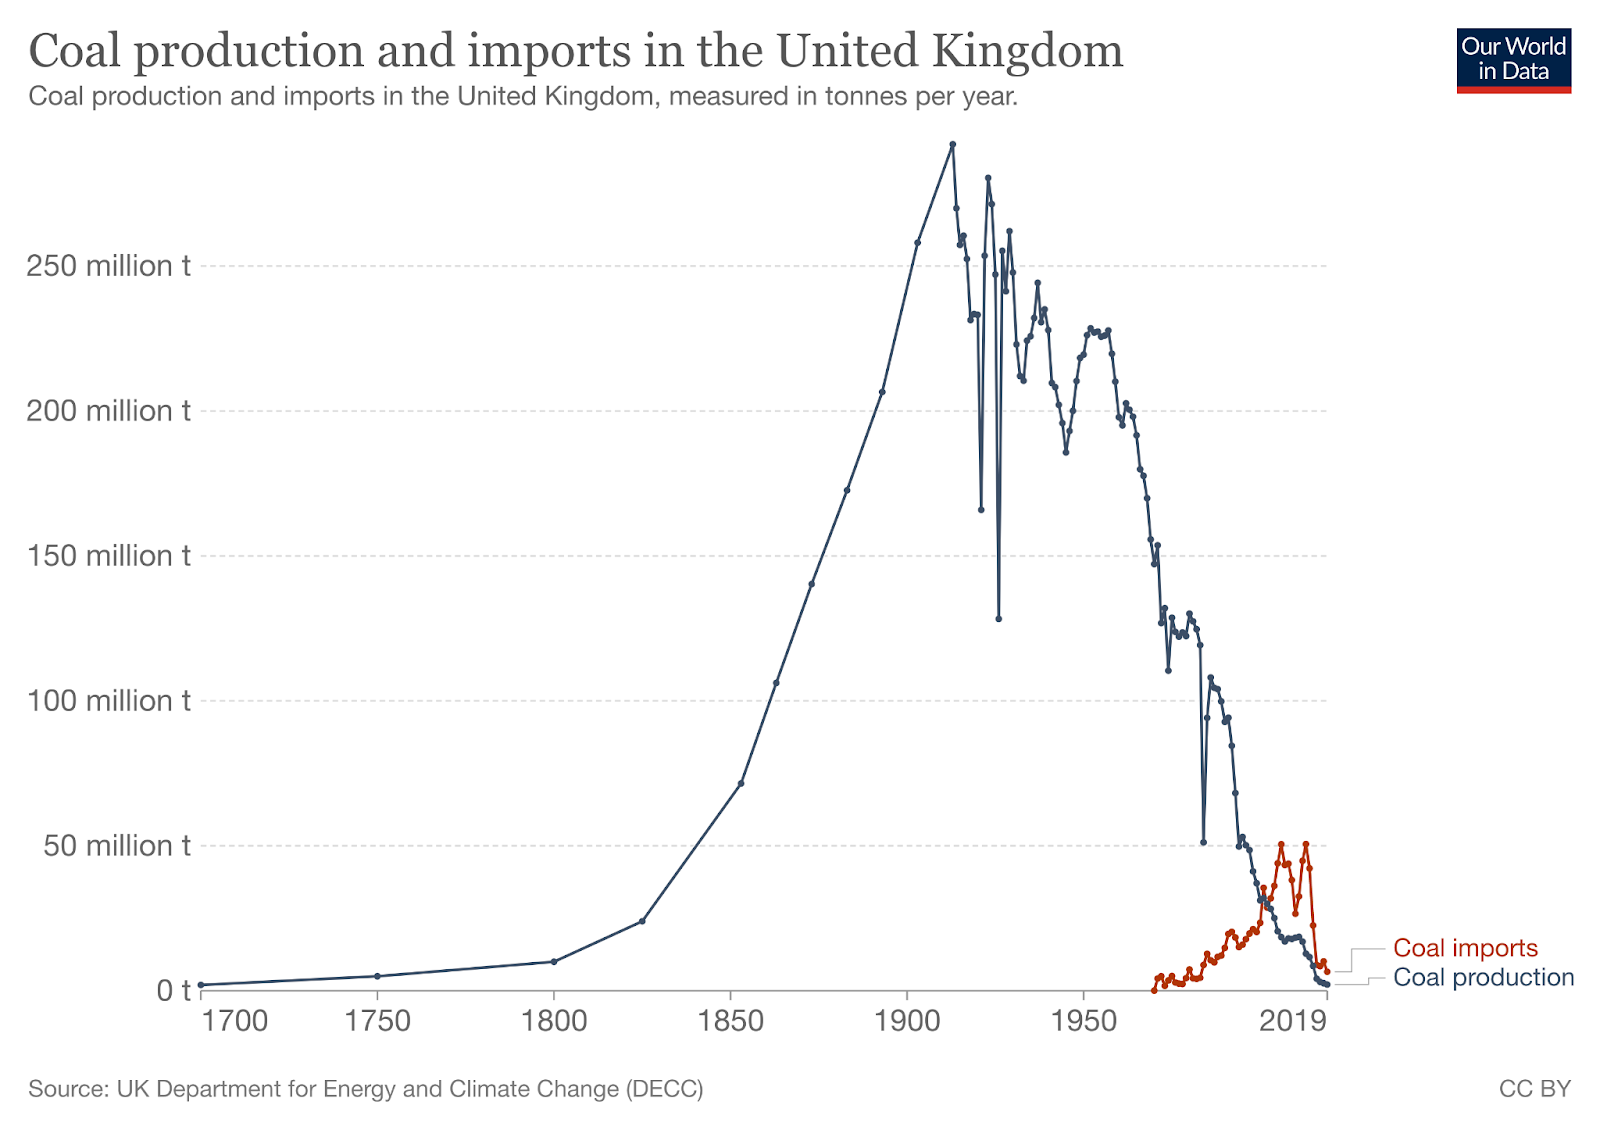 Graph of coal production and imprts in the UK from 1700 to 2019